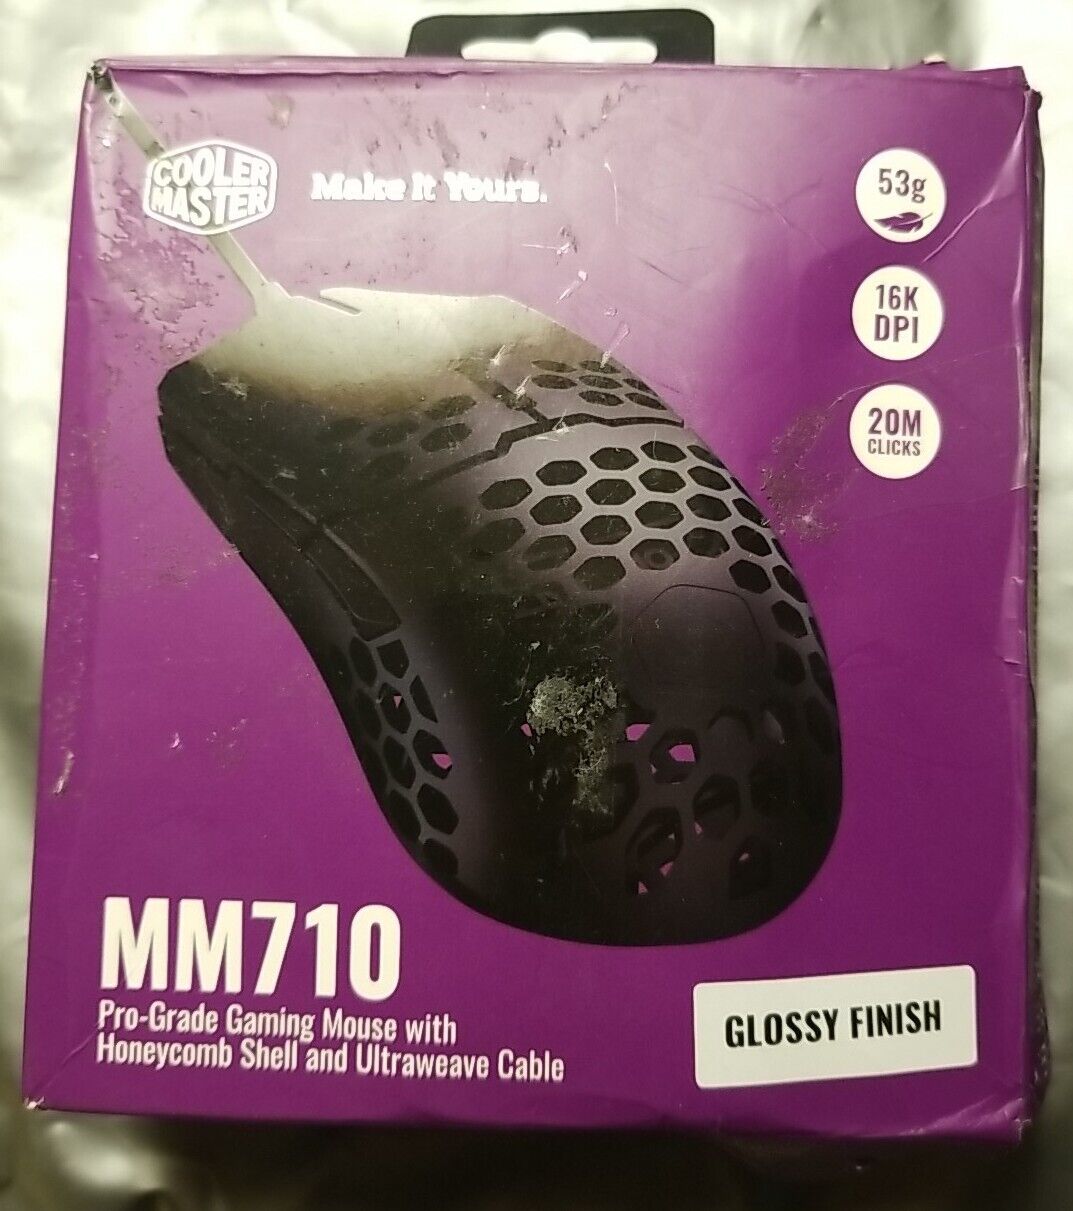 Cooler Master MM710 Pro-Grade Gaming Mouse W/Honeycomb Shell